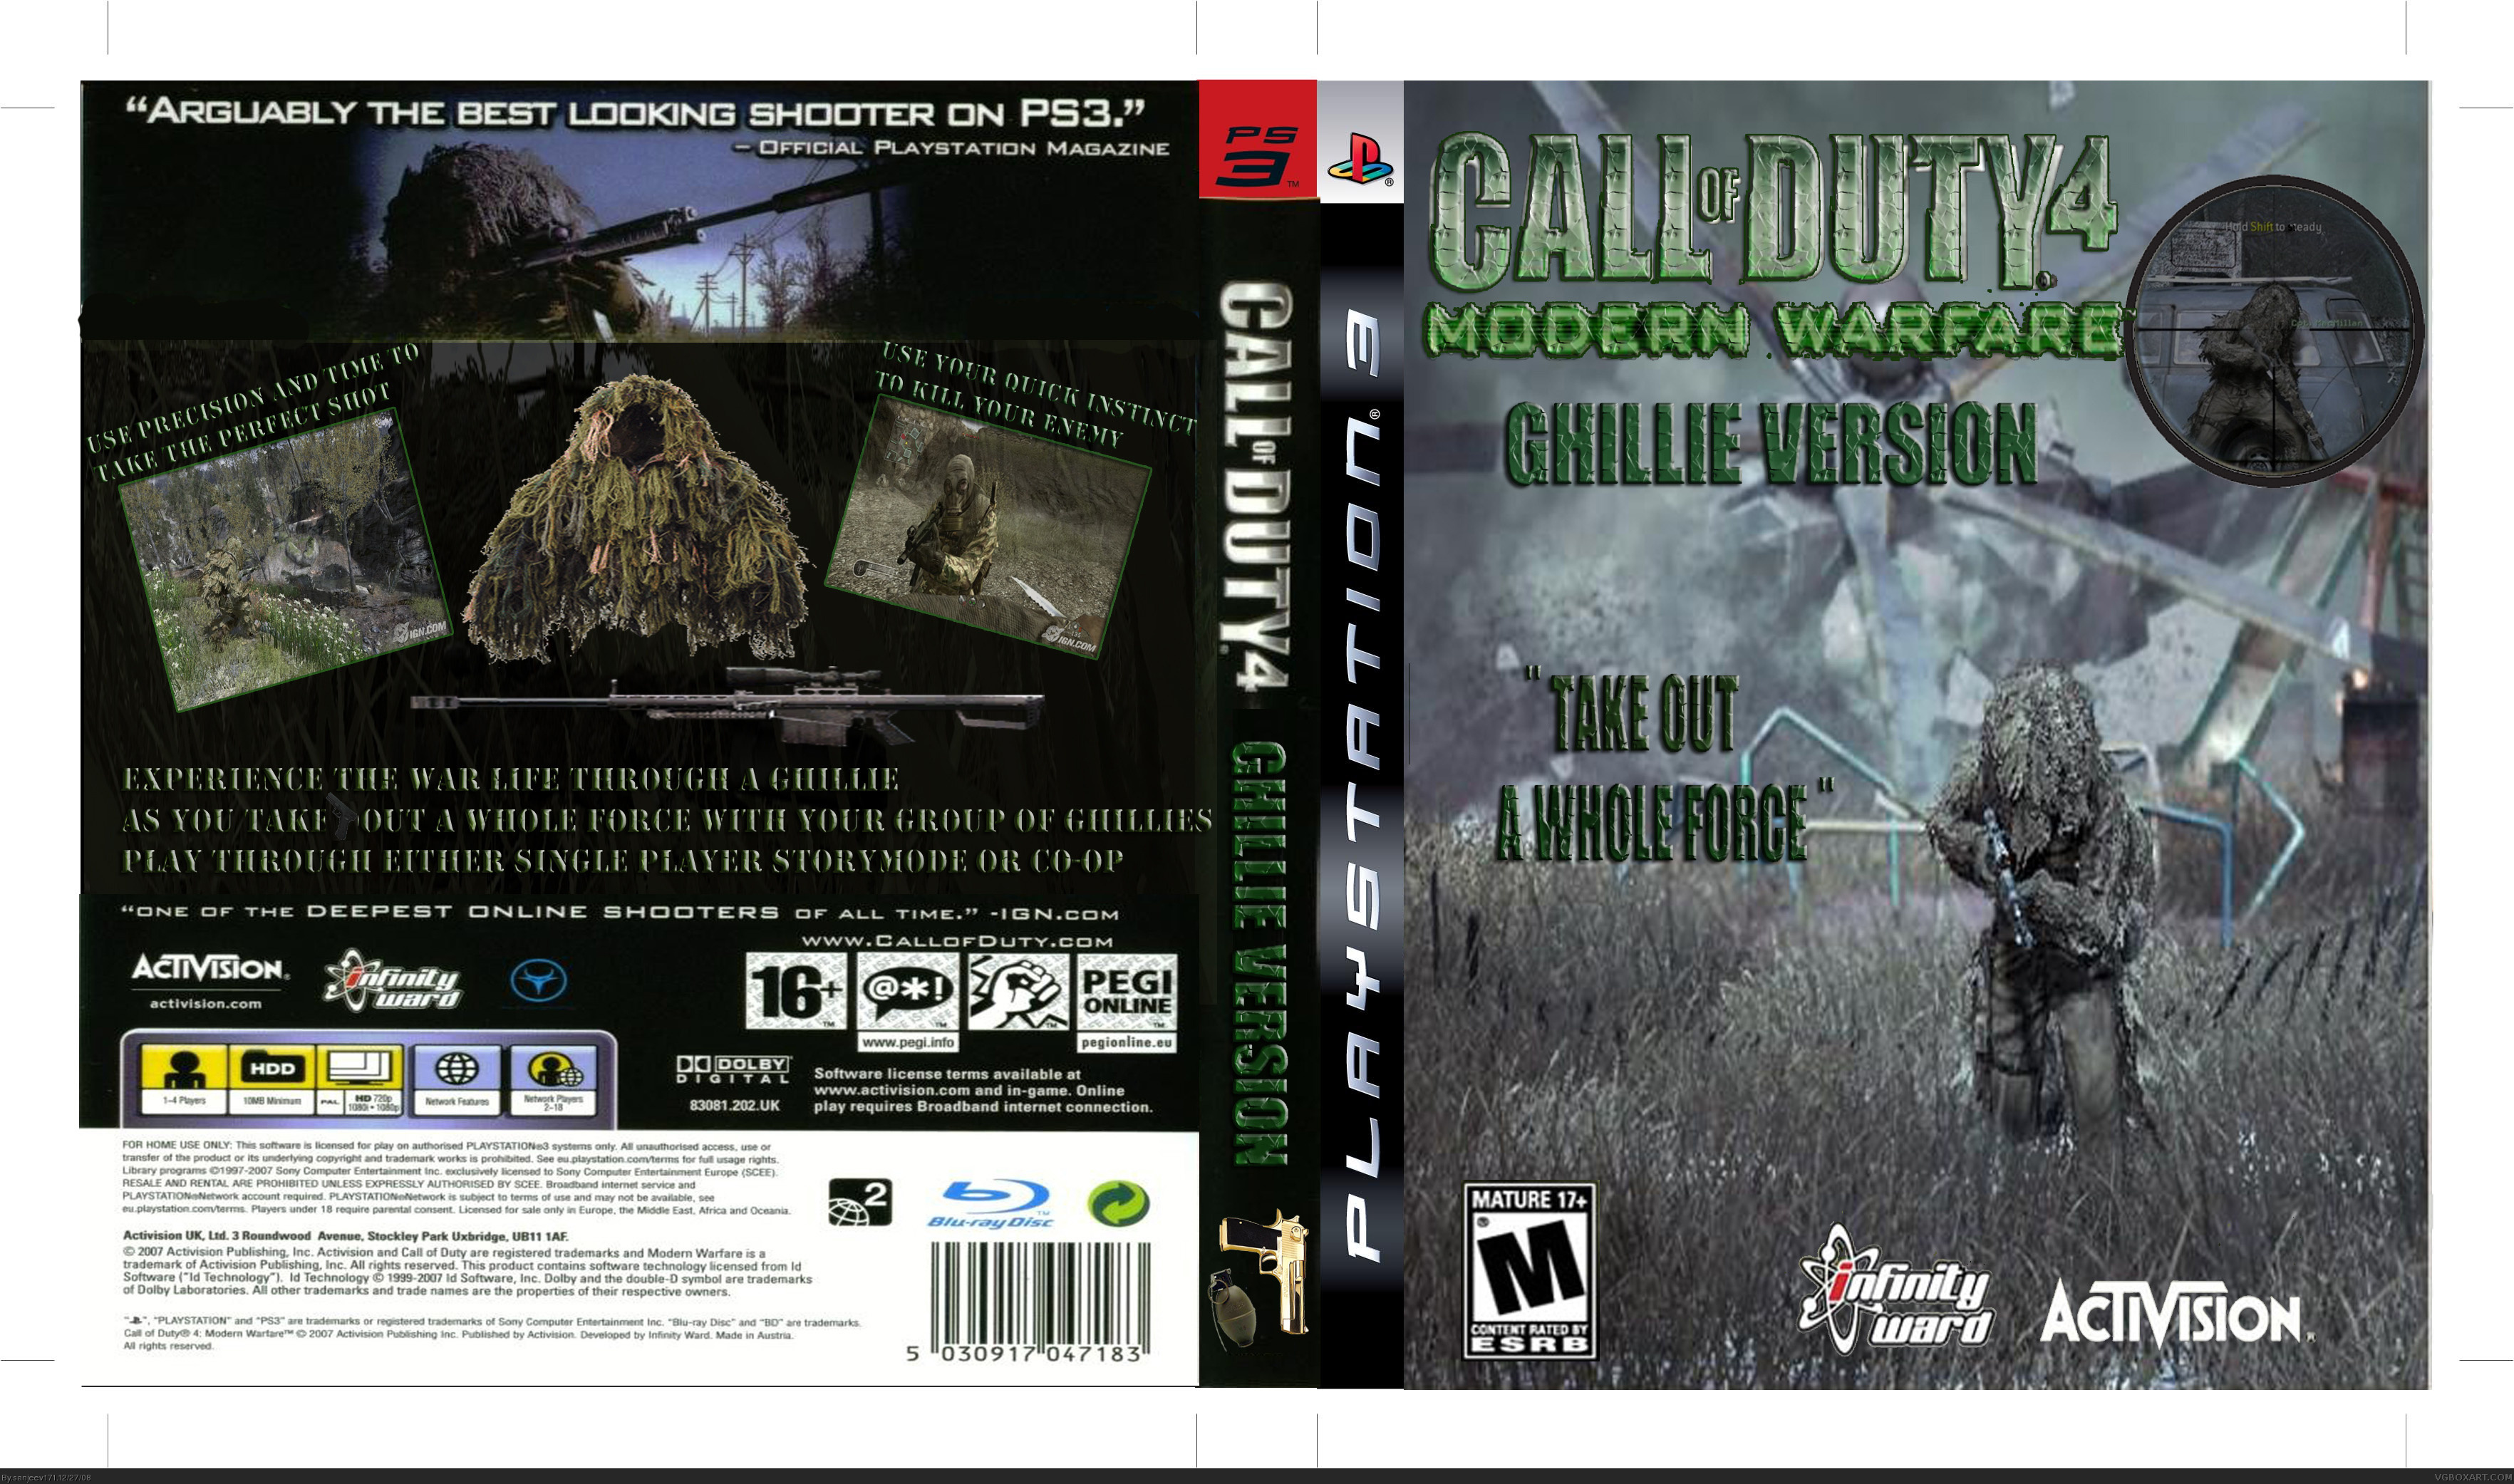 Call of Duty 4: Ghillie Version box cover